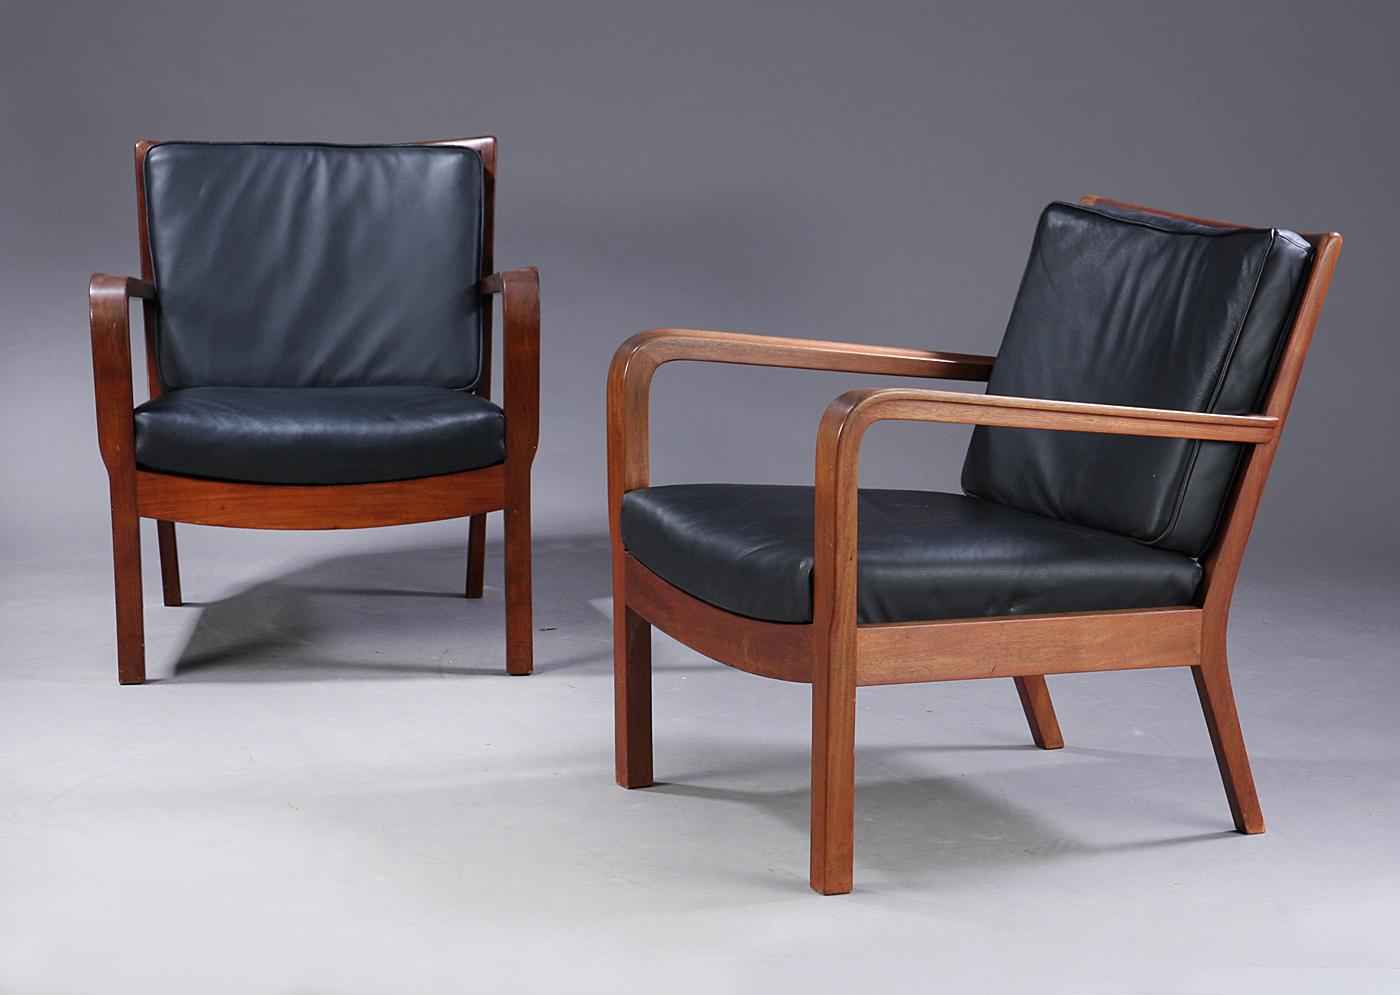 Vilhelm Lauritzen (1894-1984). A pair of low armchairs with Cuba mahogany frame, loose cushions later upholstered in black leather. H. 75/40. B. 66. D. ca. 75 cm. Traces of wear commensurate with age and marks, minor rejection of the wood on seams.